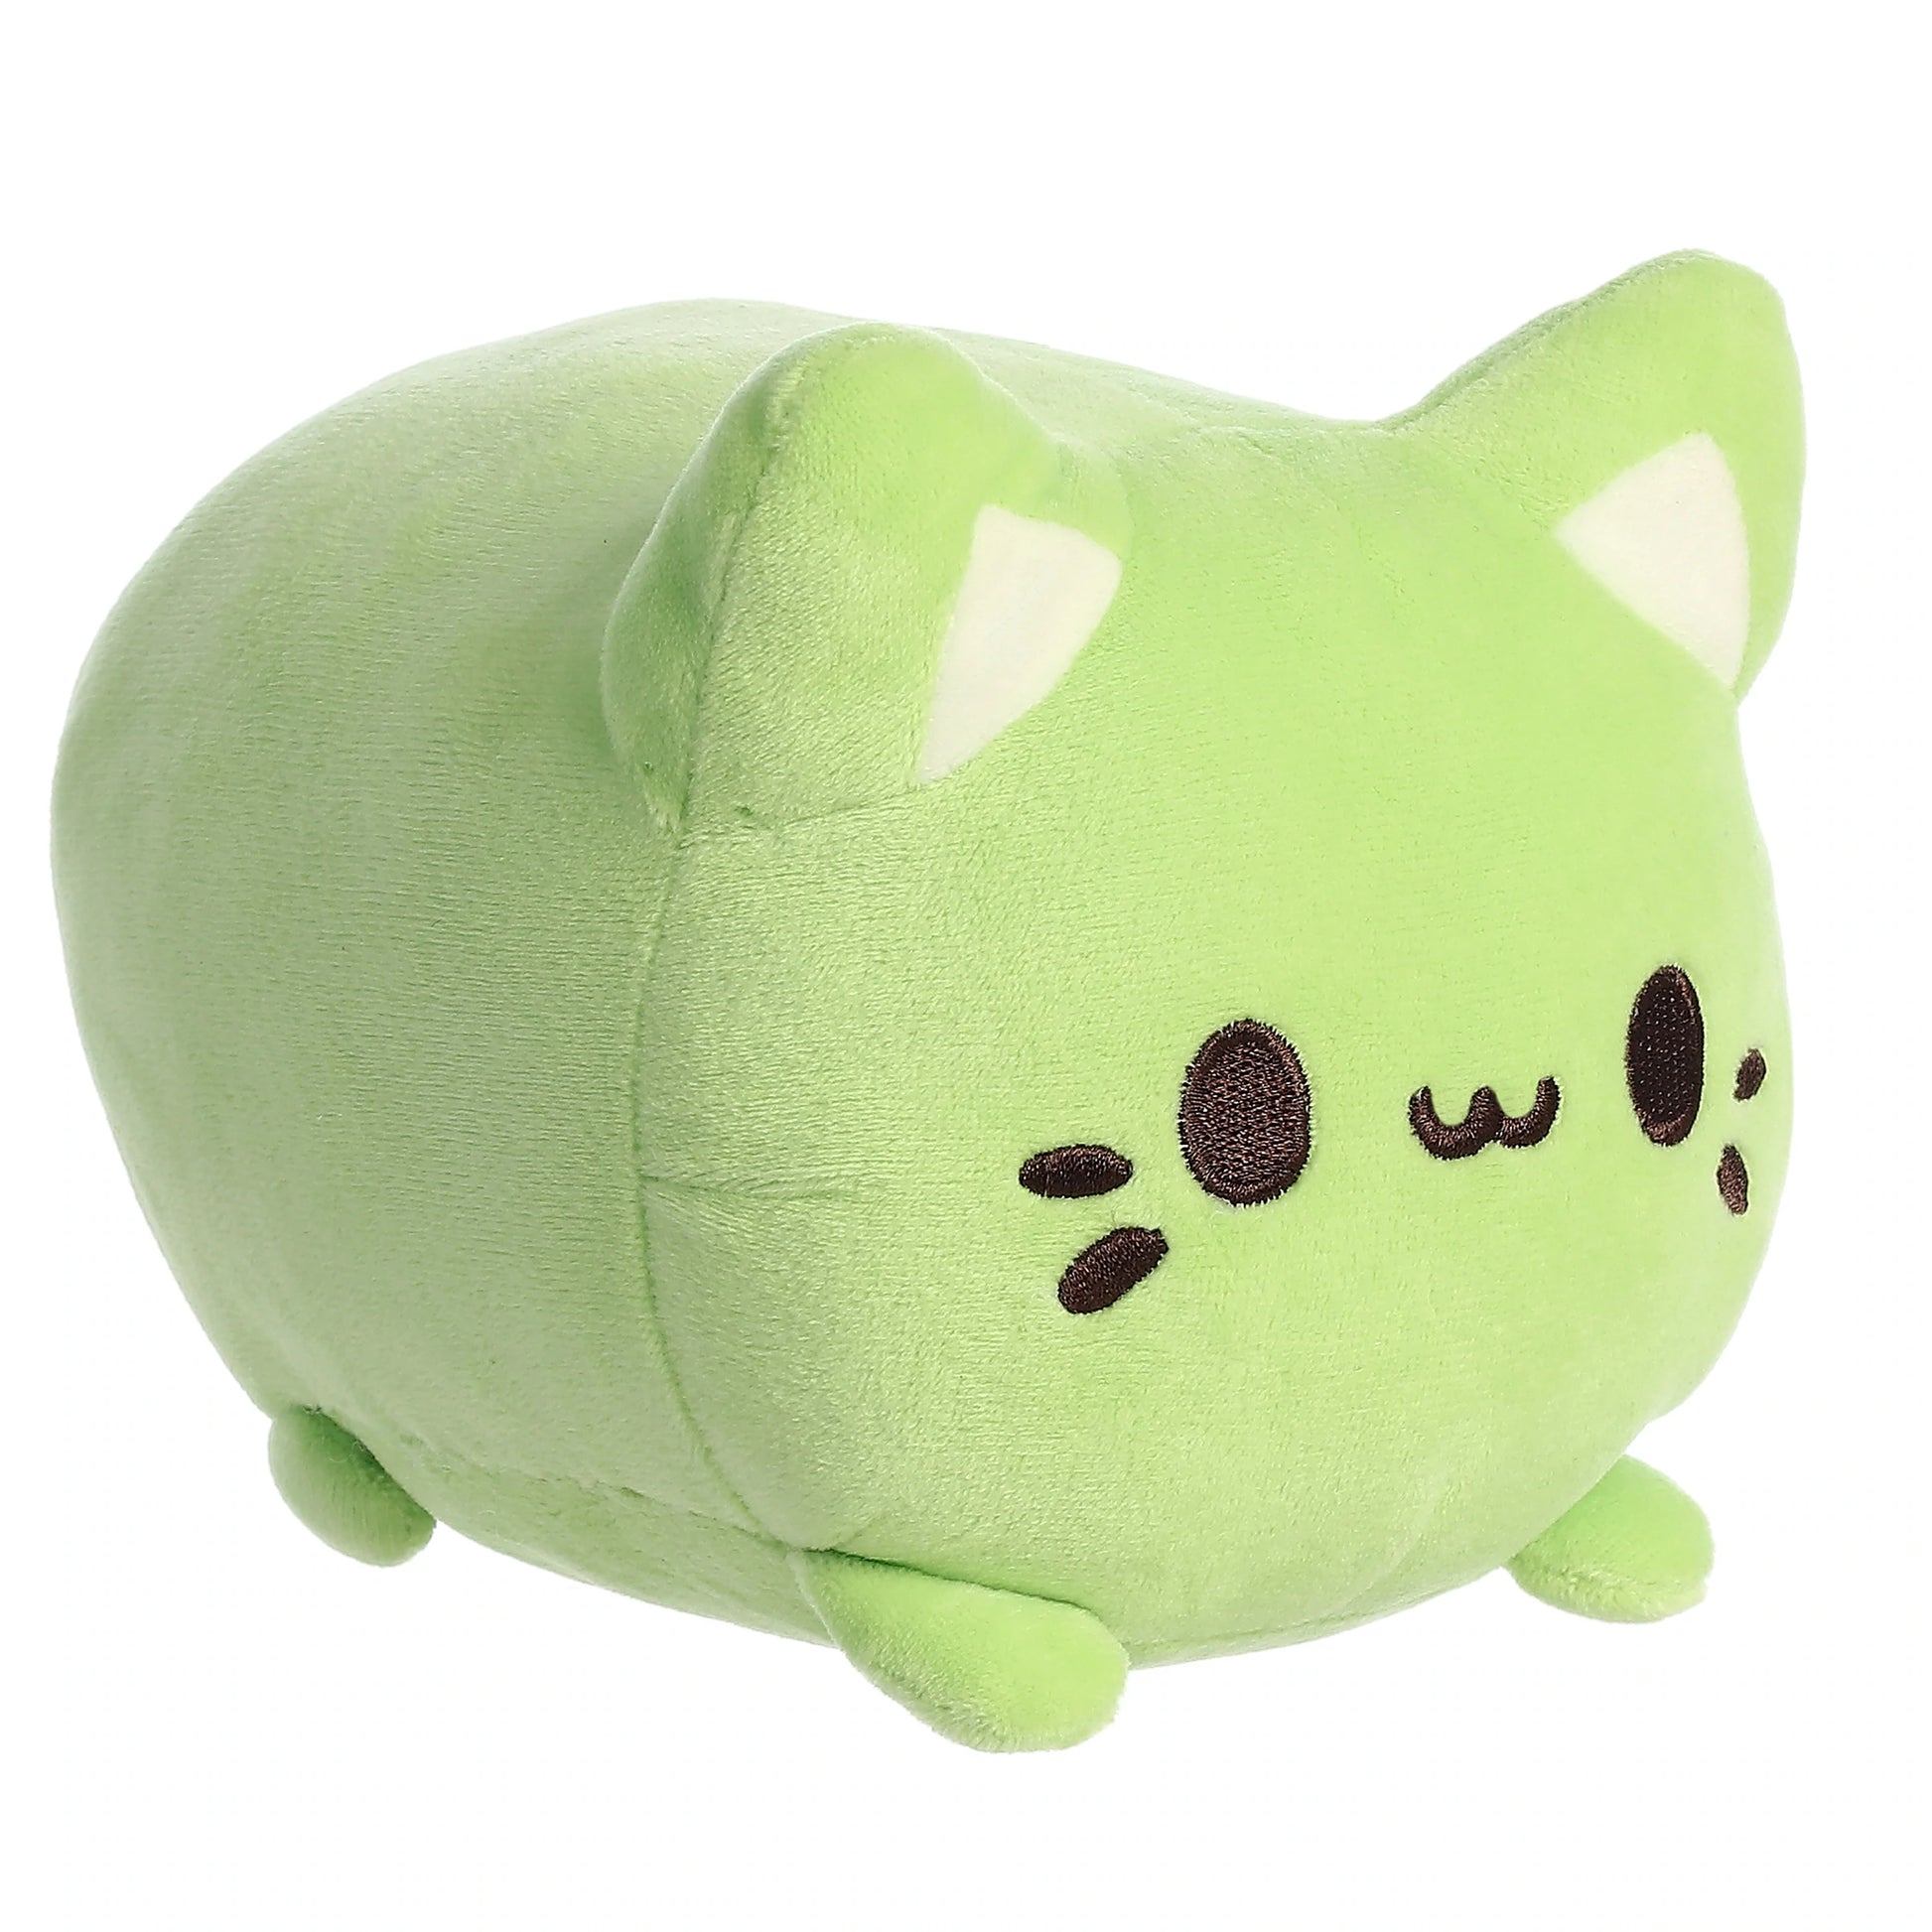 This soft green tea Meowchi comes to you with warm healing effects! Cuddling them will make you feel like you just finished a cup of warm tea! They are overstuffed, & made from a super soft minky fabric with embroidered features!